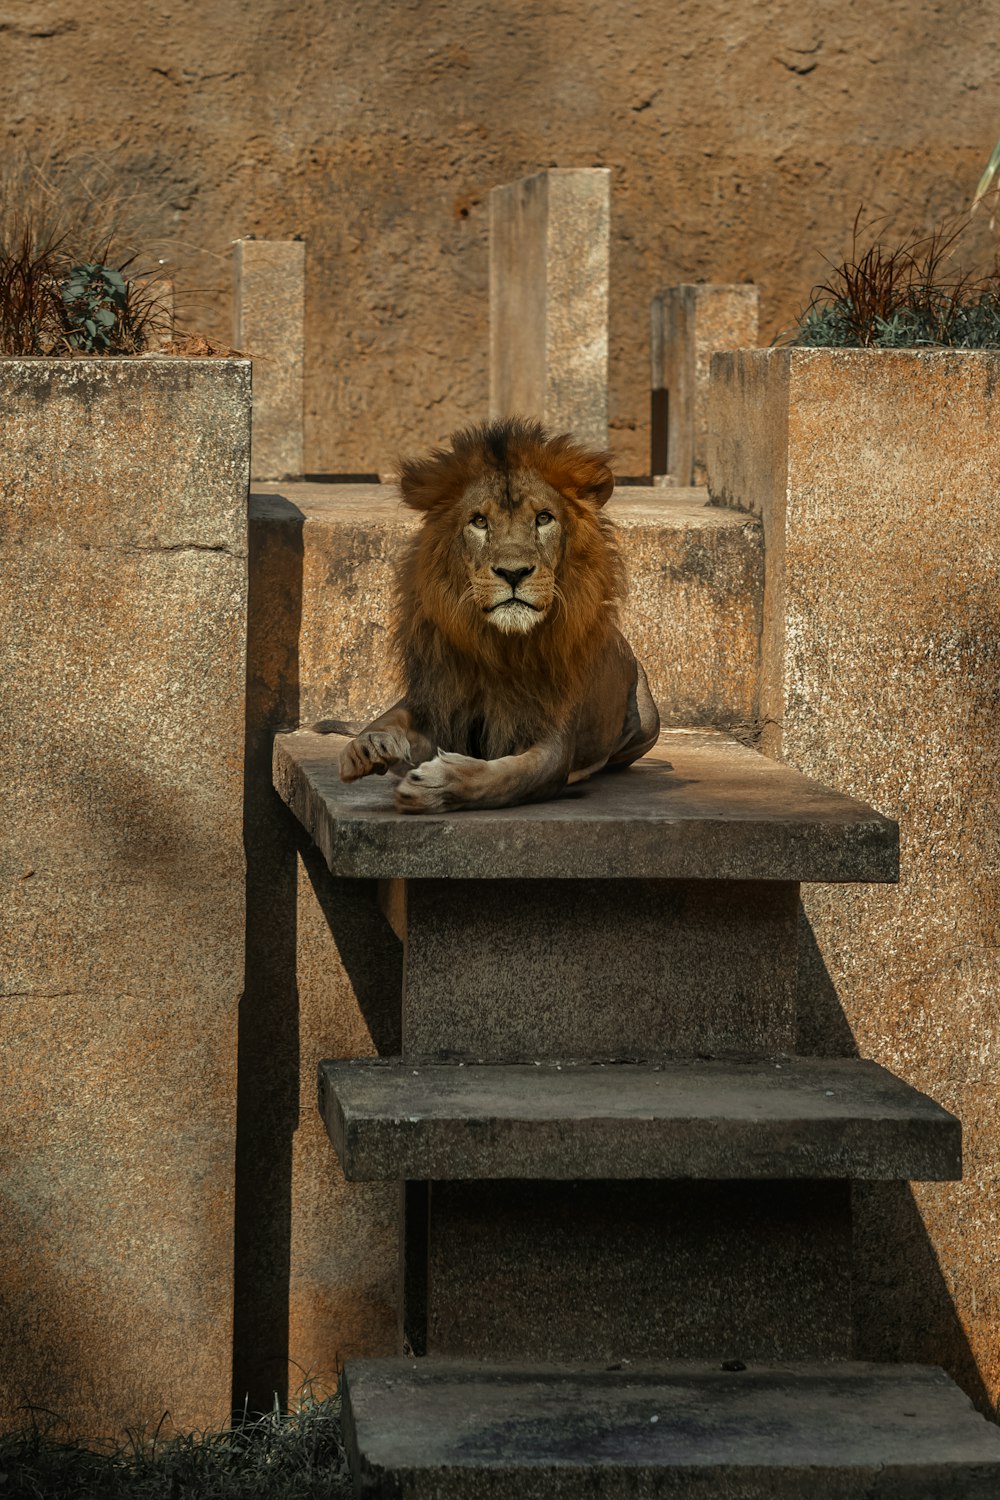 a lion sitting on top of a wooden bench